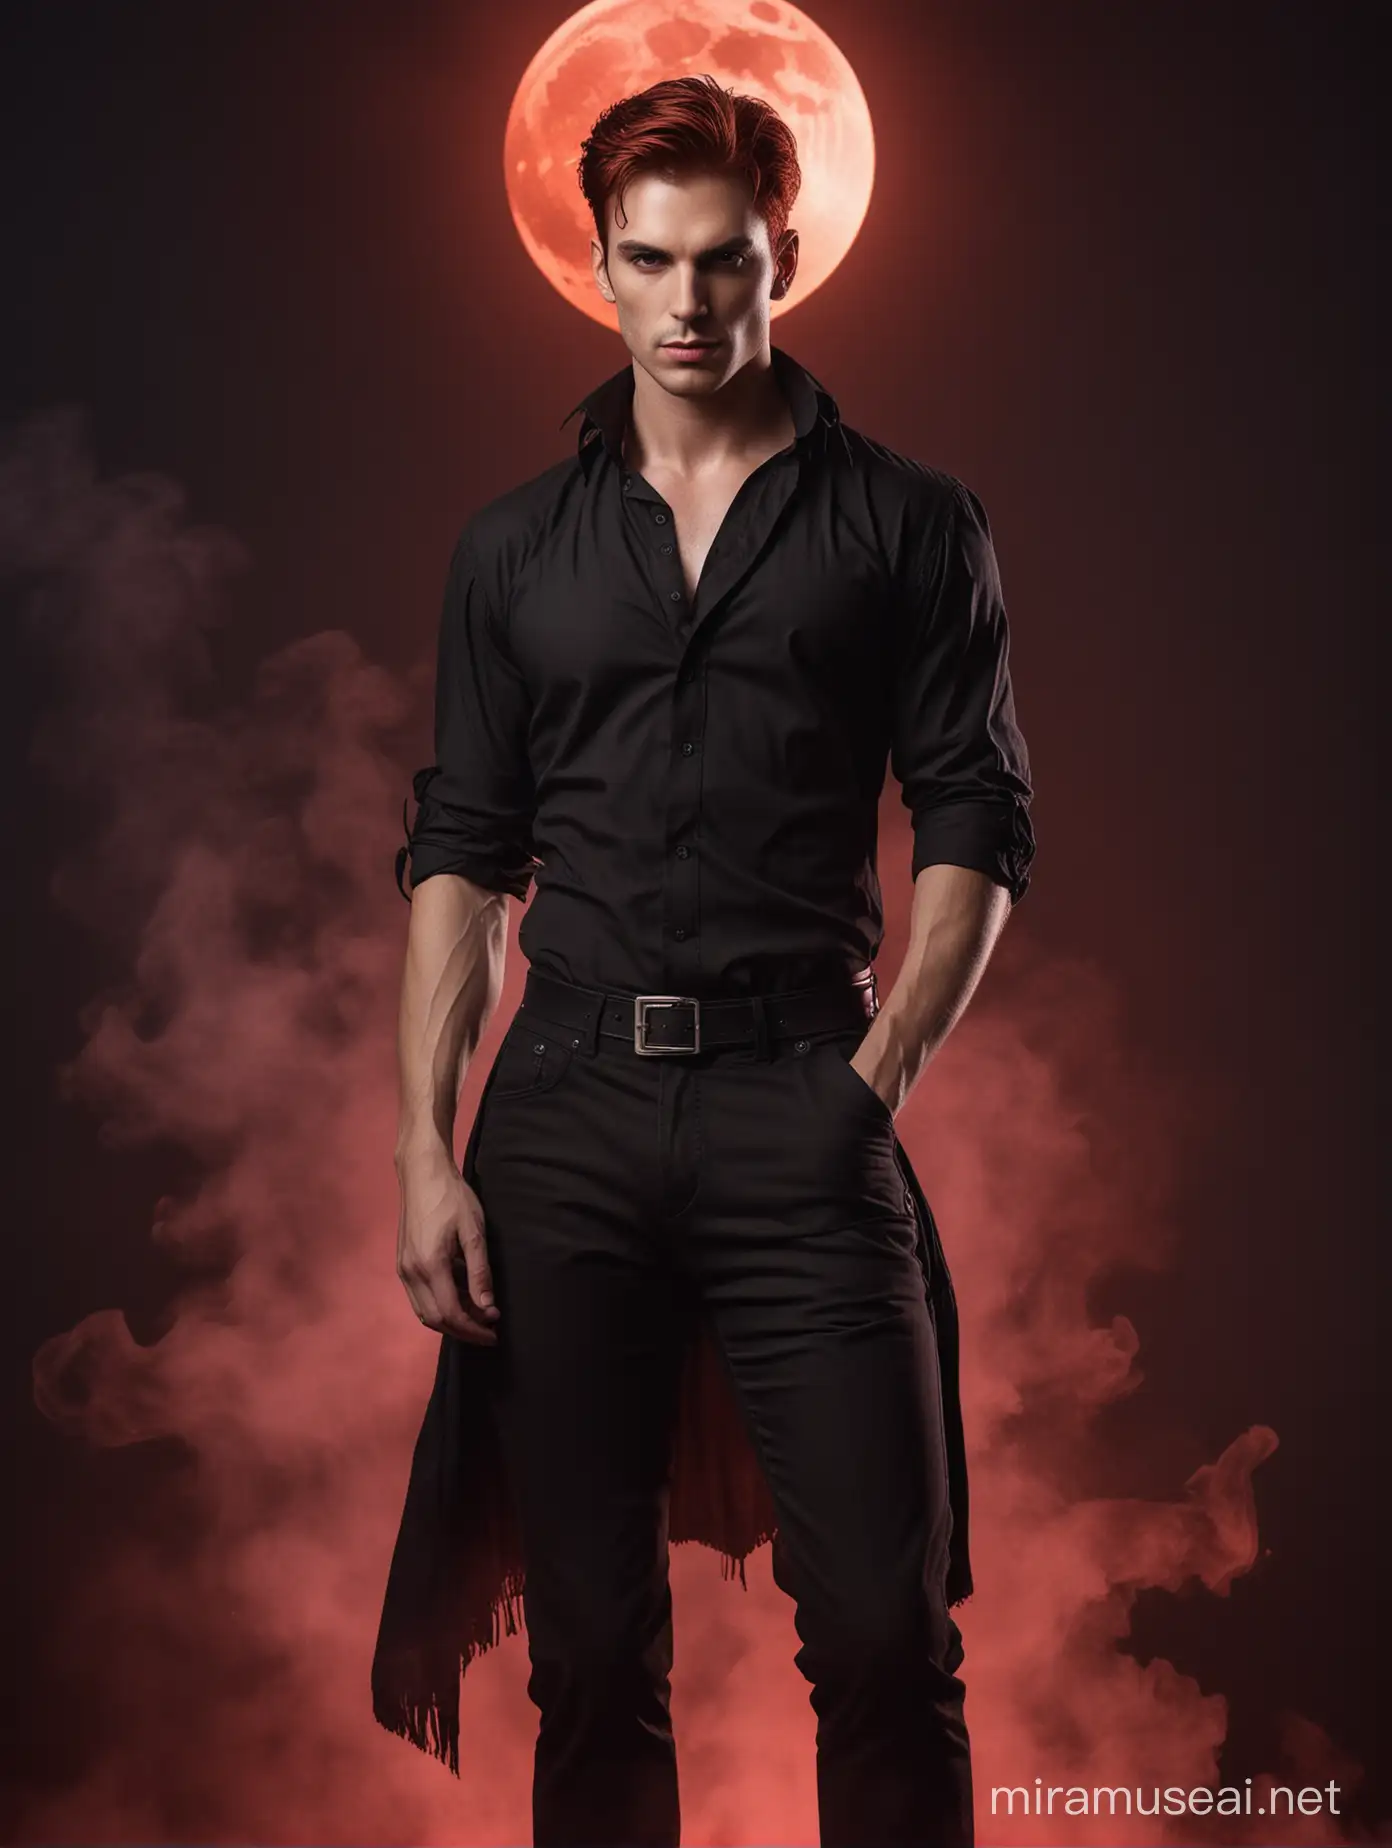 A handsome vampire man that has dark red hair and wearing a black shirt and black fitted pants while looking at the camera intently. The background should be pitch black behind him and a huge red full moon. Below his thigh, there’s a red smoke.